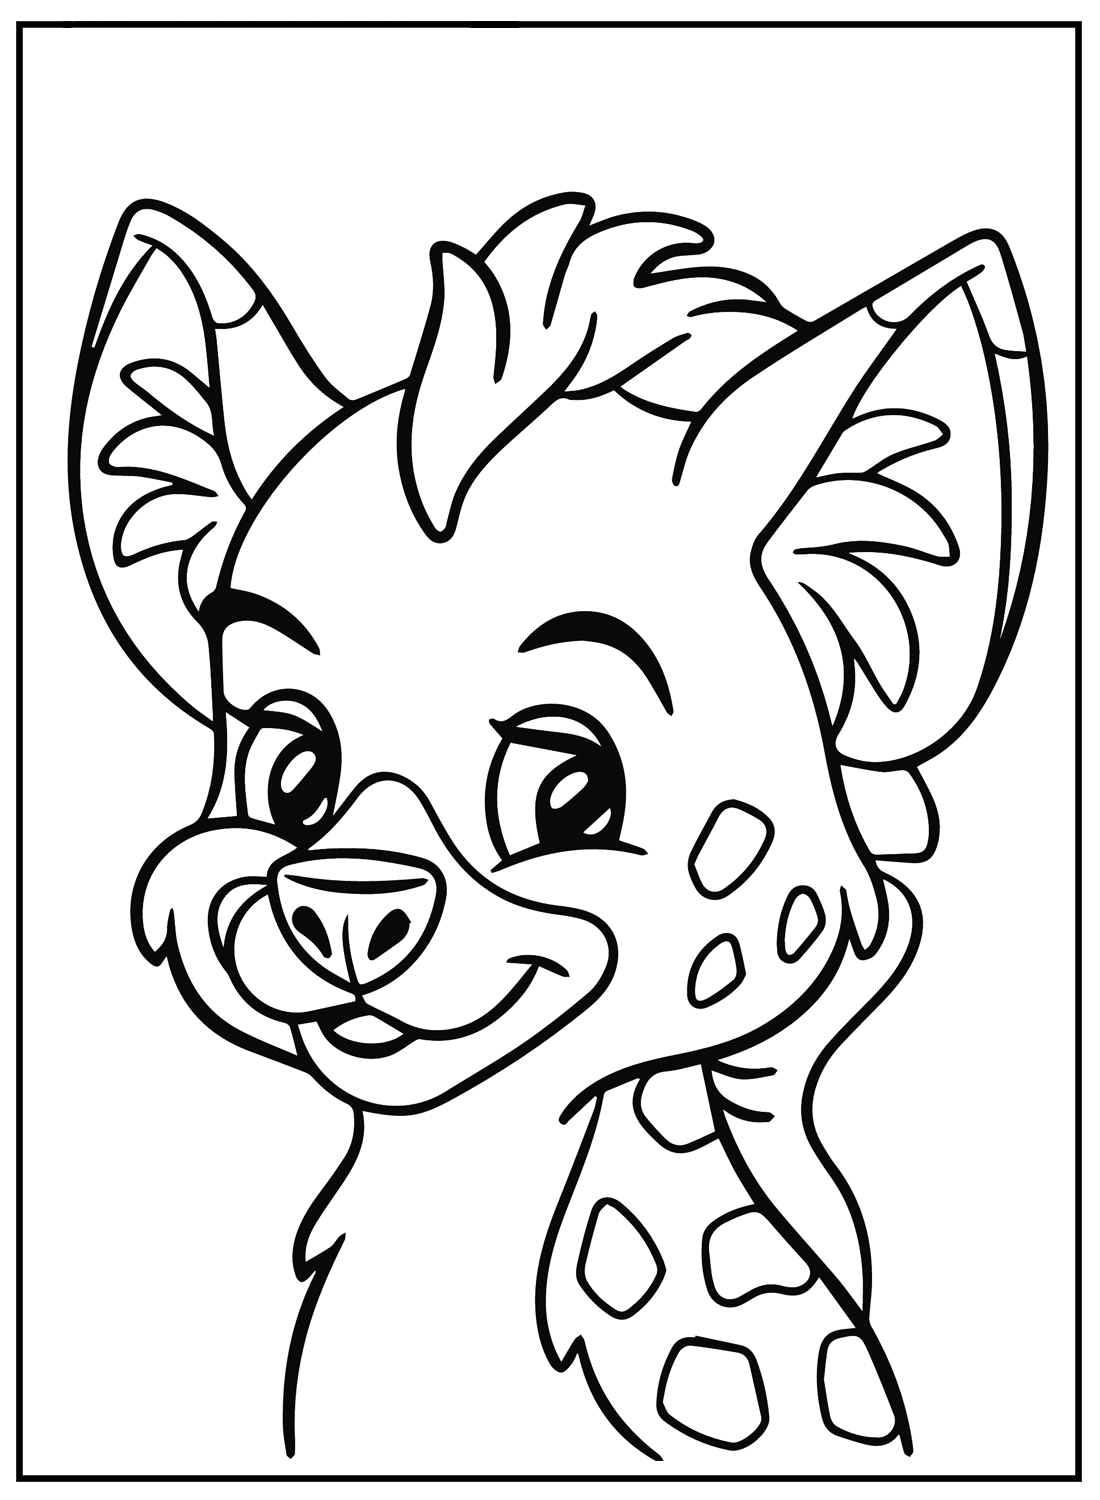 Cute Hyena Image Coloring Pages